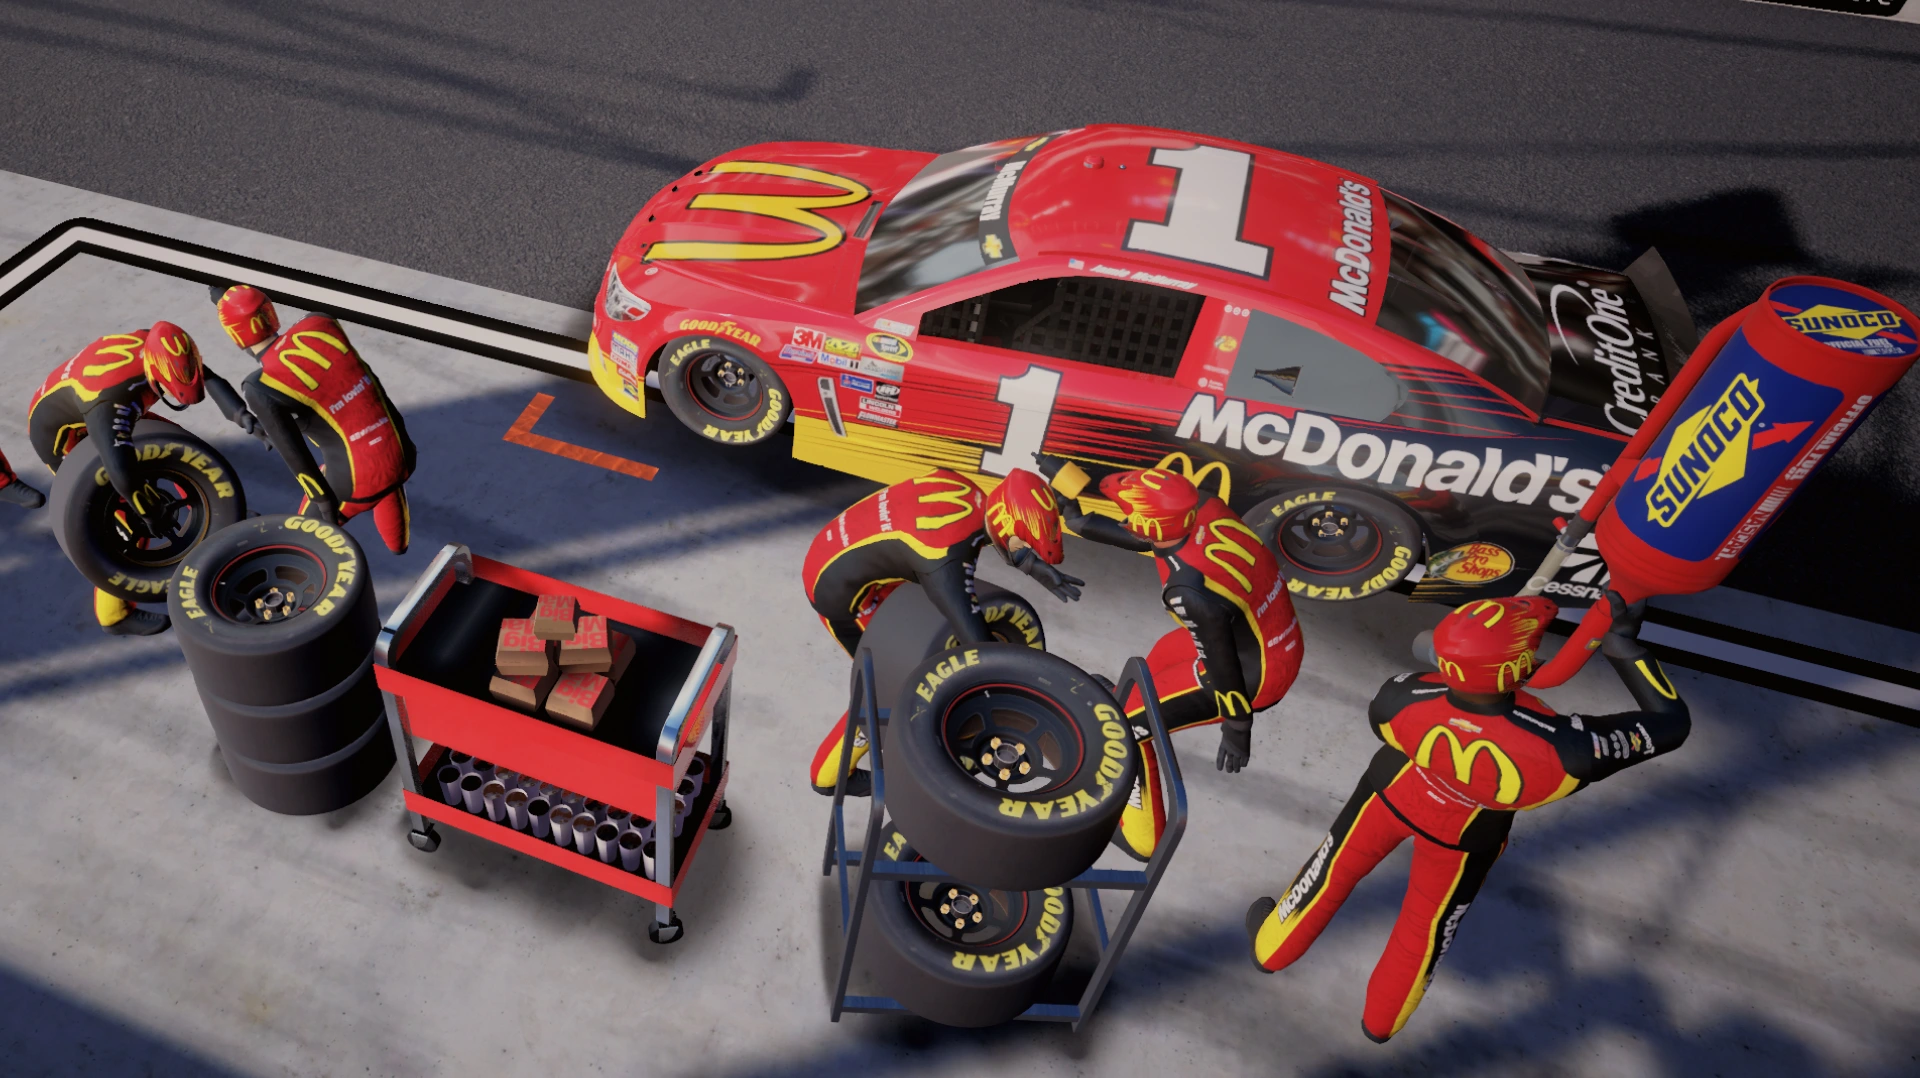 action shot of McDonald's NASCAR pit crew changing tires and refilling gas